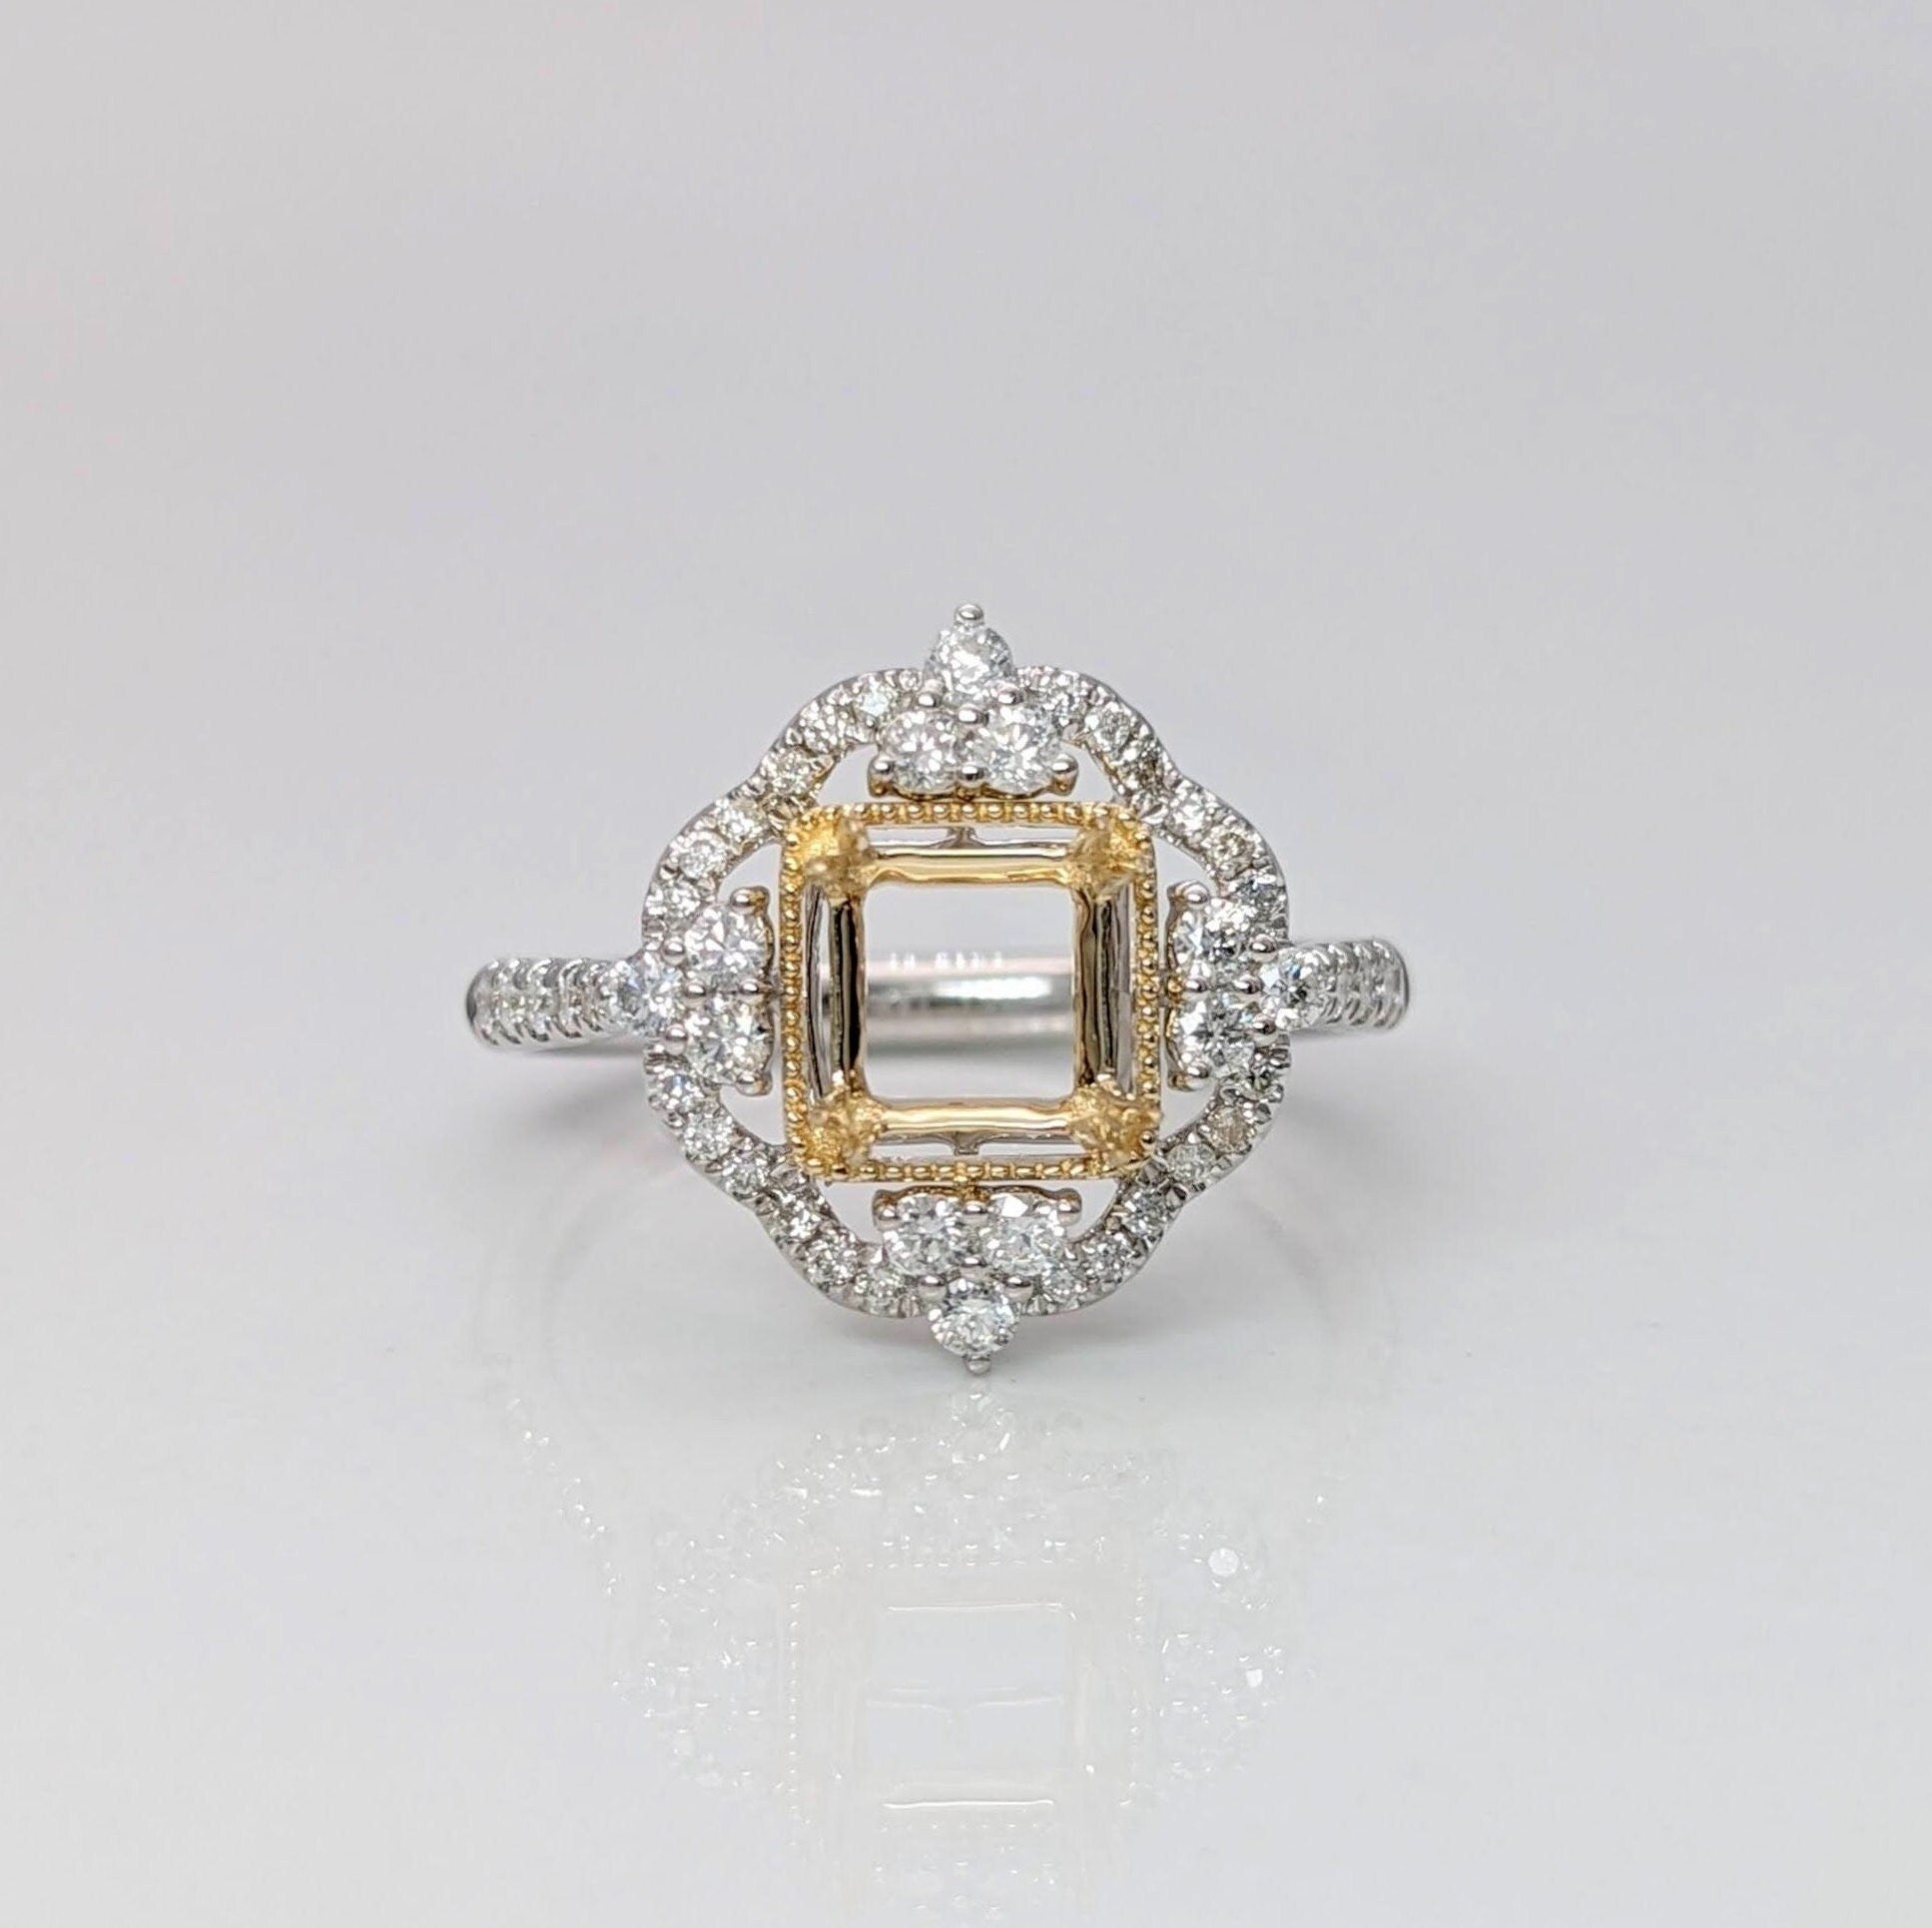 Vintage Inspired Ring Semi Mount in Solid 14k Gold | Emerald Cut 7x5mm 10x8mm | Dual Tone, White, Yellow or Rose Gold | Gemstone Setting